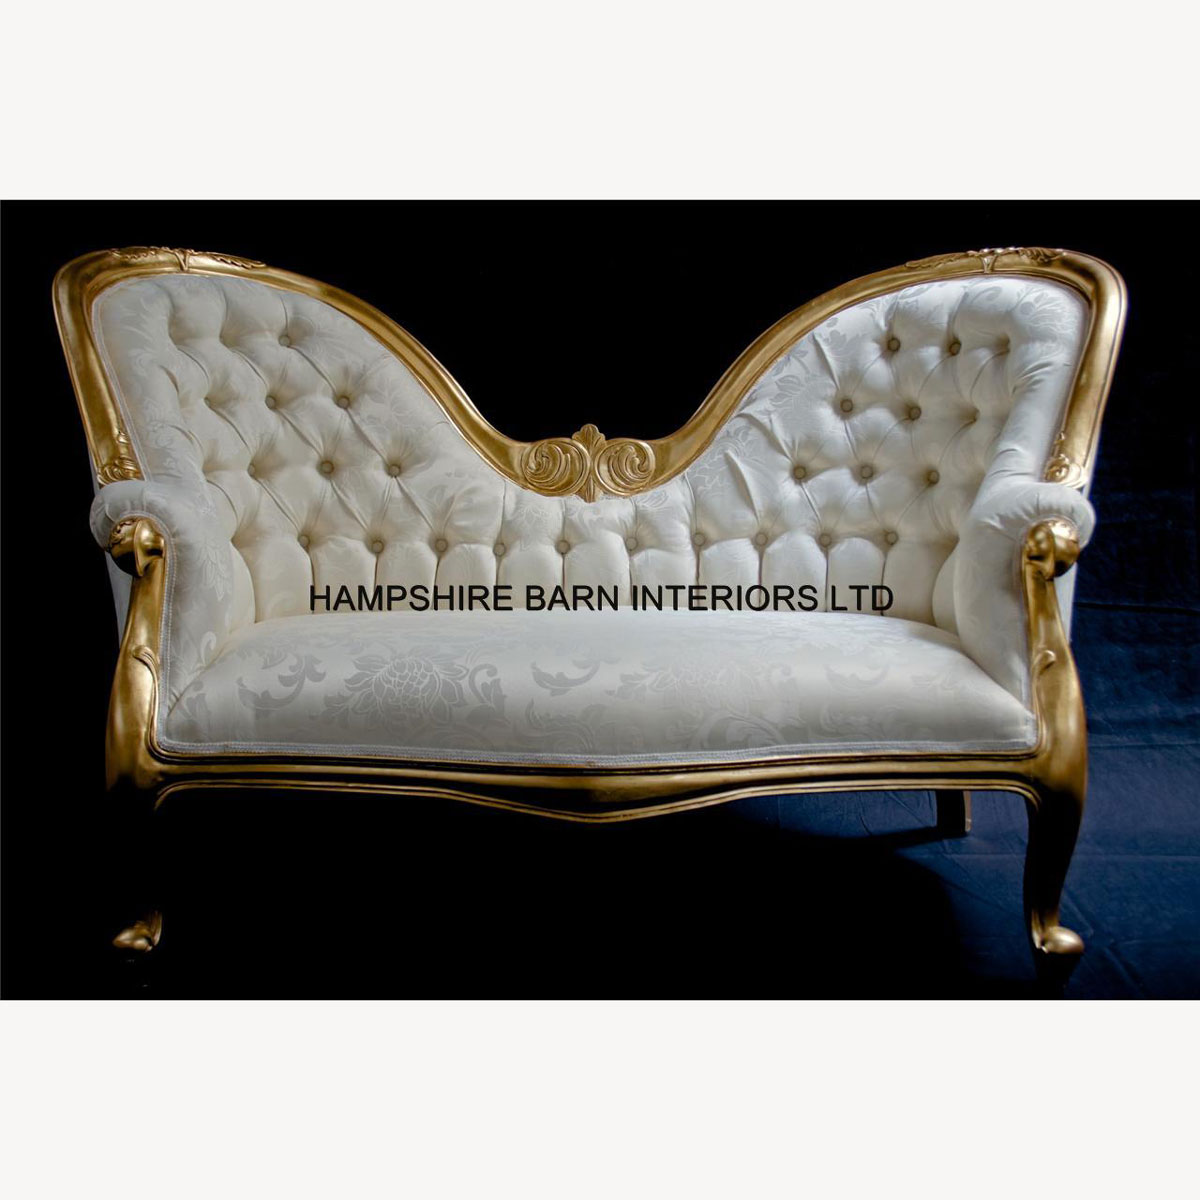 Parisian Double Ended Sofa In Gold Leaf And Ivory Cream Fabric 1 - Hampshire Barn Interiors - Parisian Double Ended Sofa In Gold Leaf And Ivory Cream Fabric -